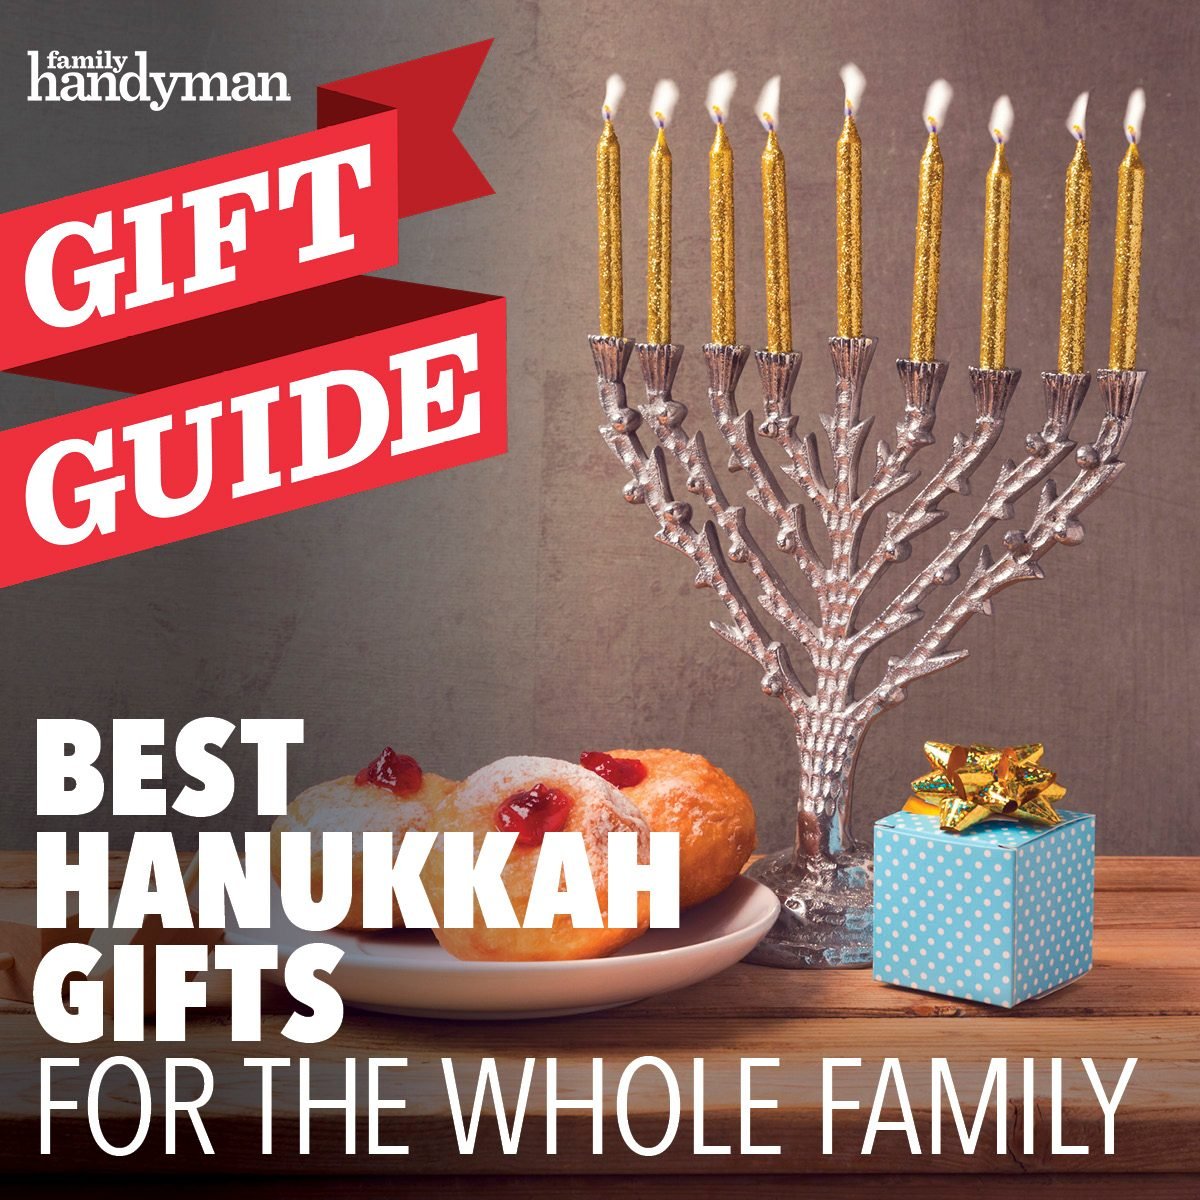 8 Best Hanukkah Gifts for the Whole Family Family Handyman